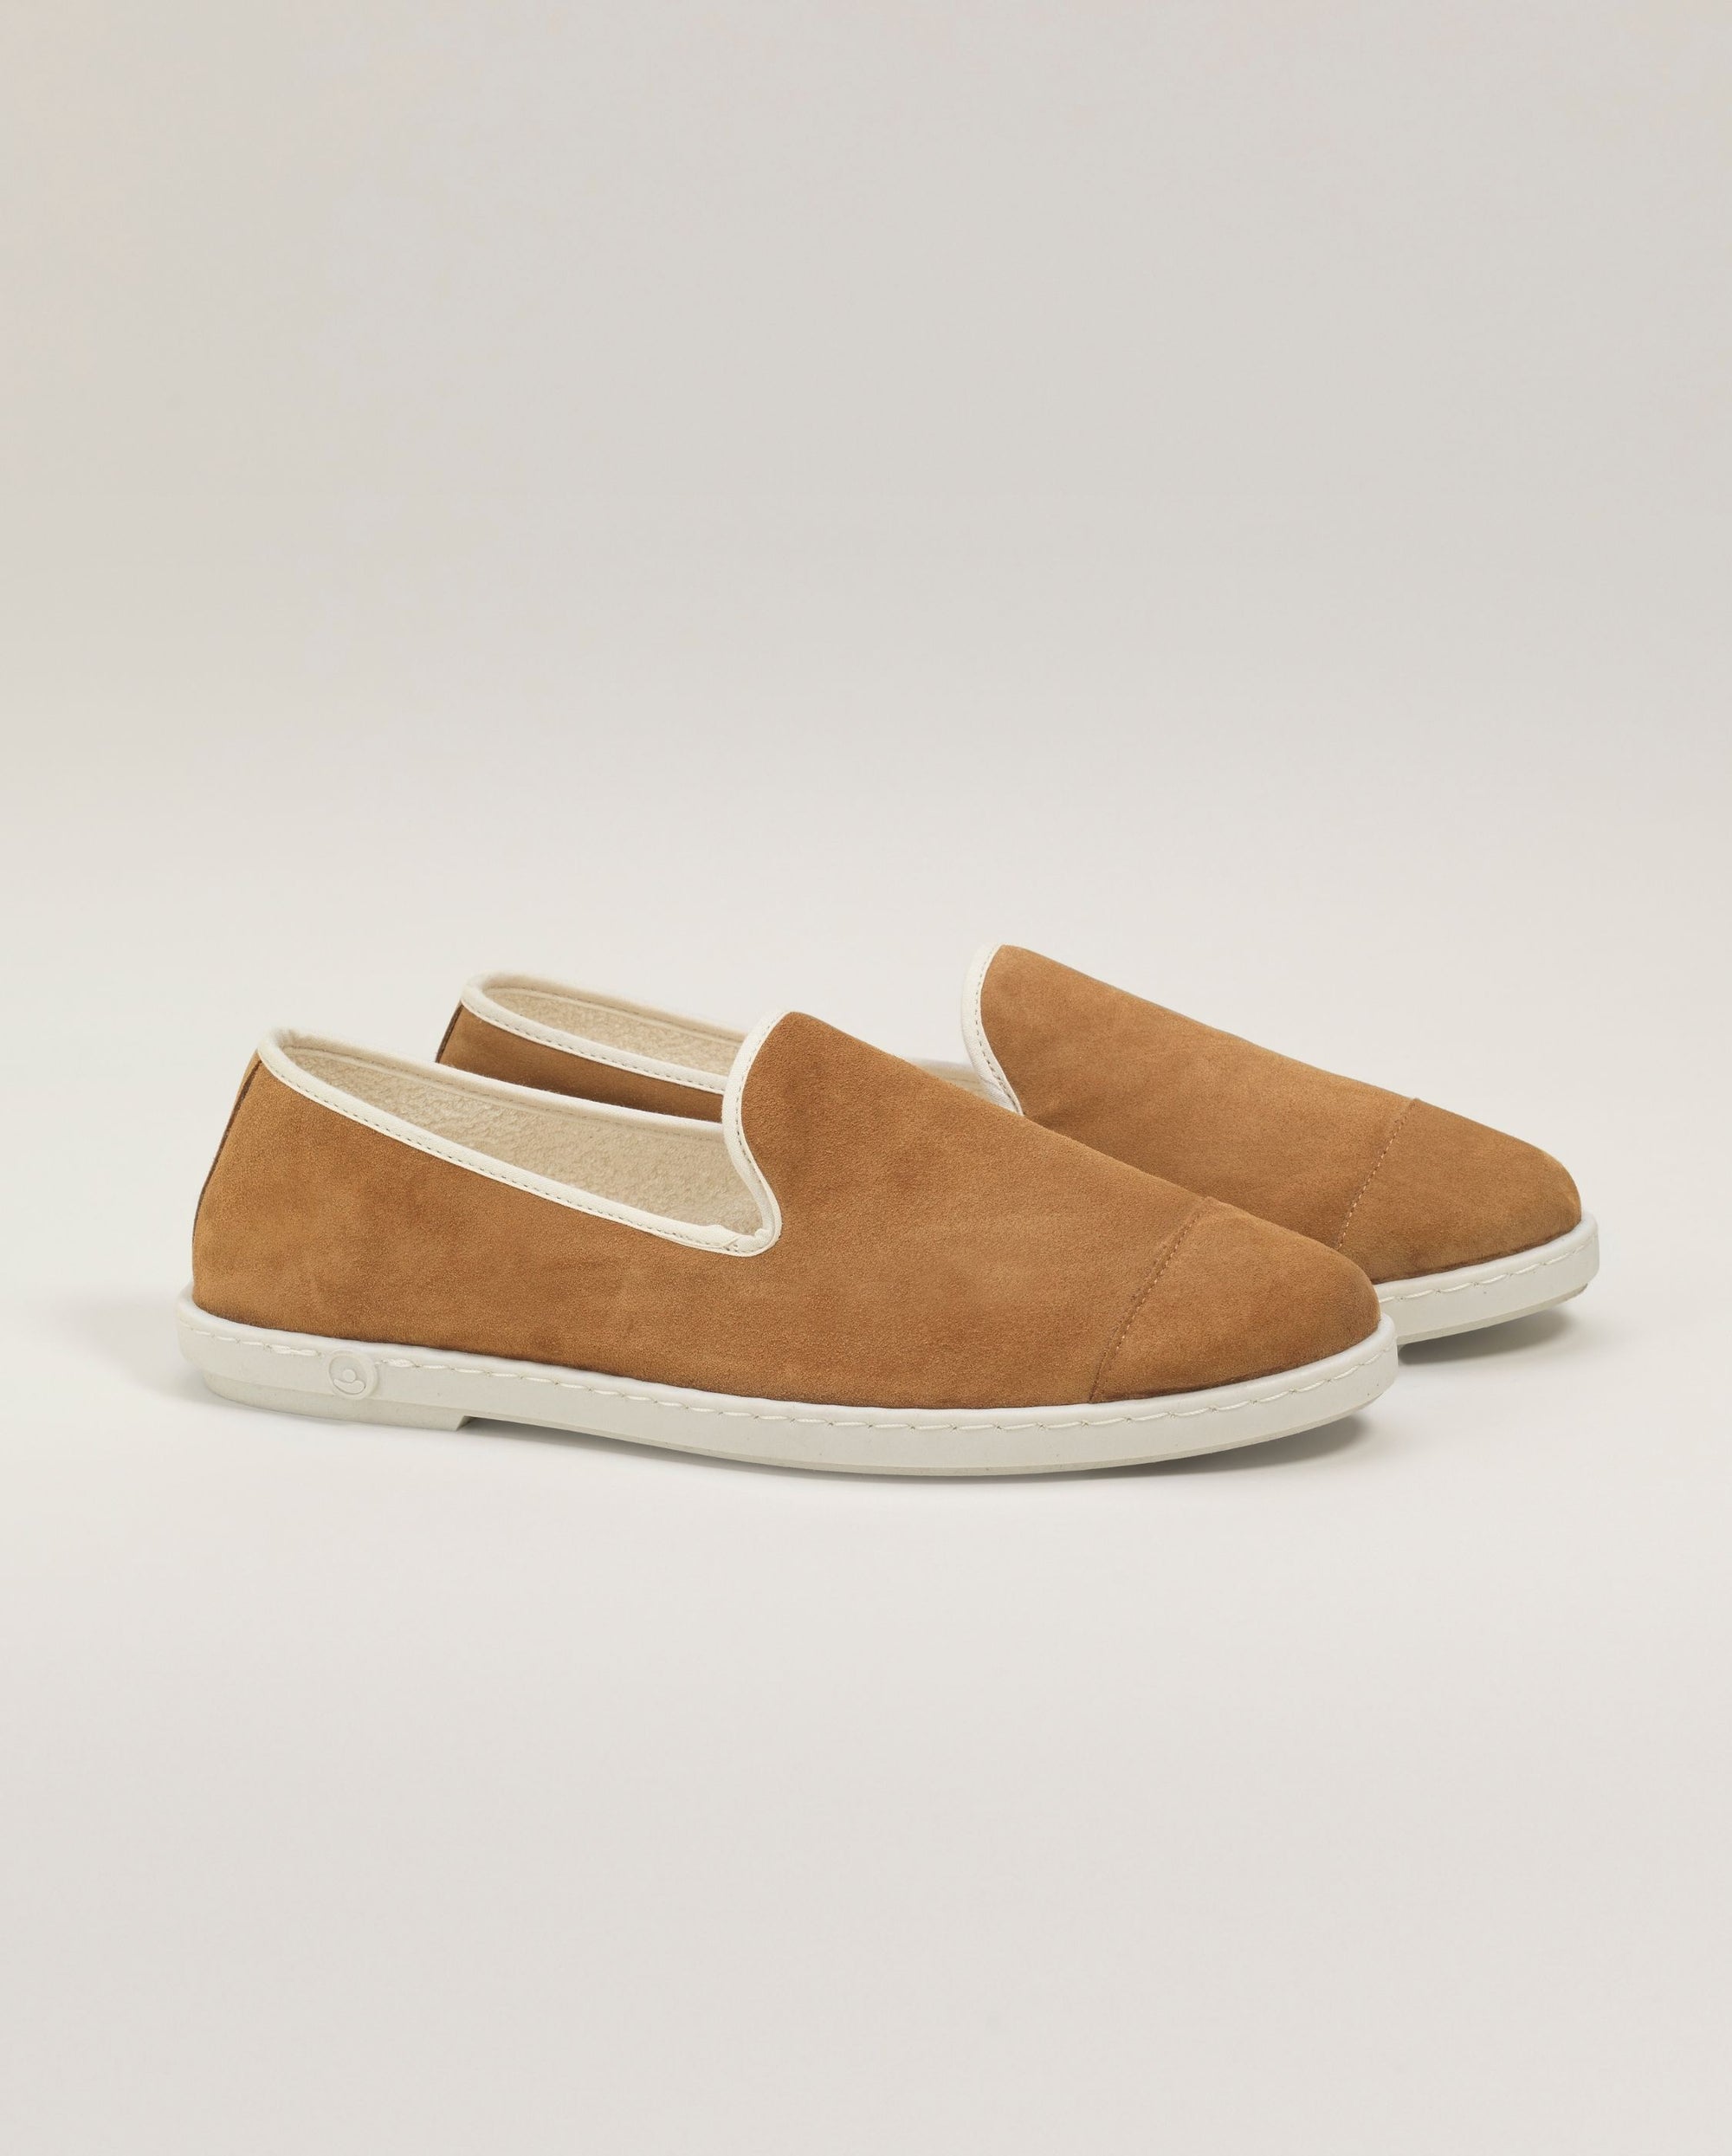 Chausson homme cuir, camel